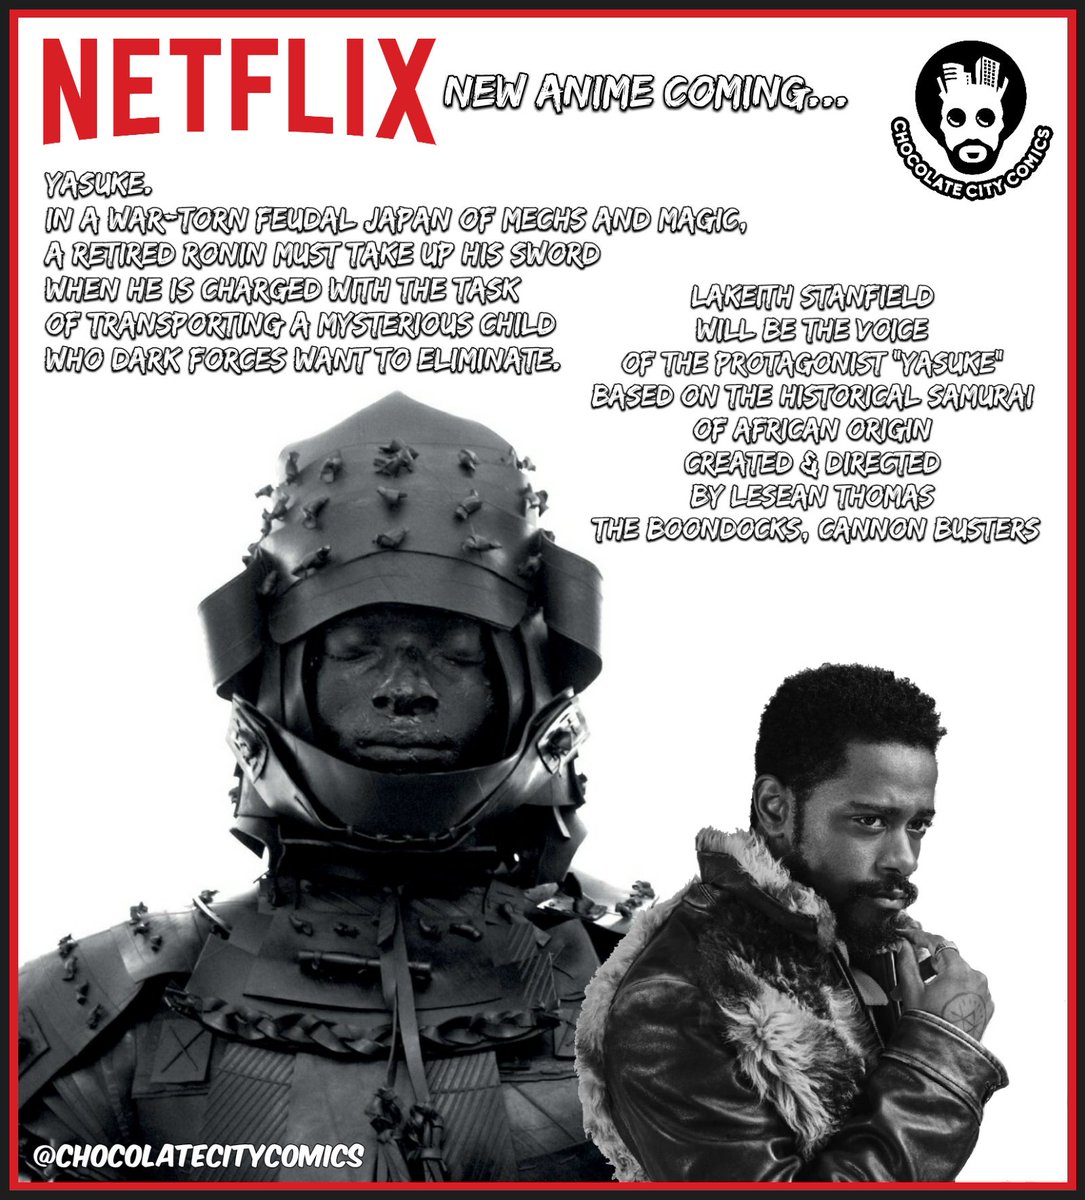 Upcoming Netflix Yasuke anime series directed by LeSean Thomas starring Lakeith Stanfield 